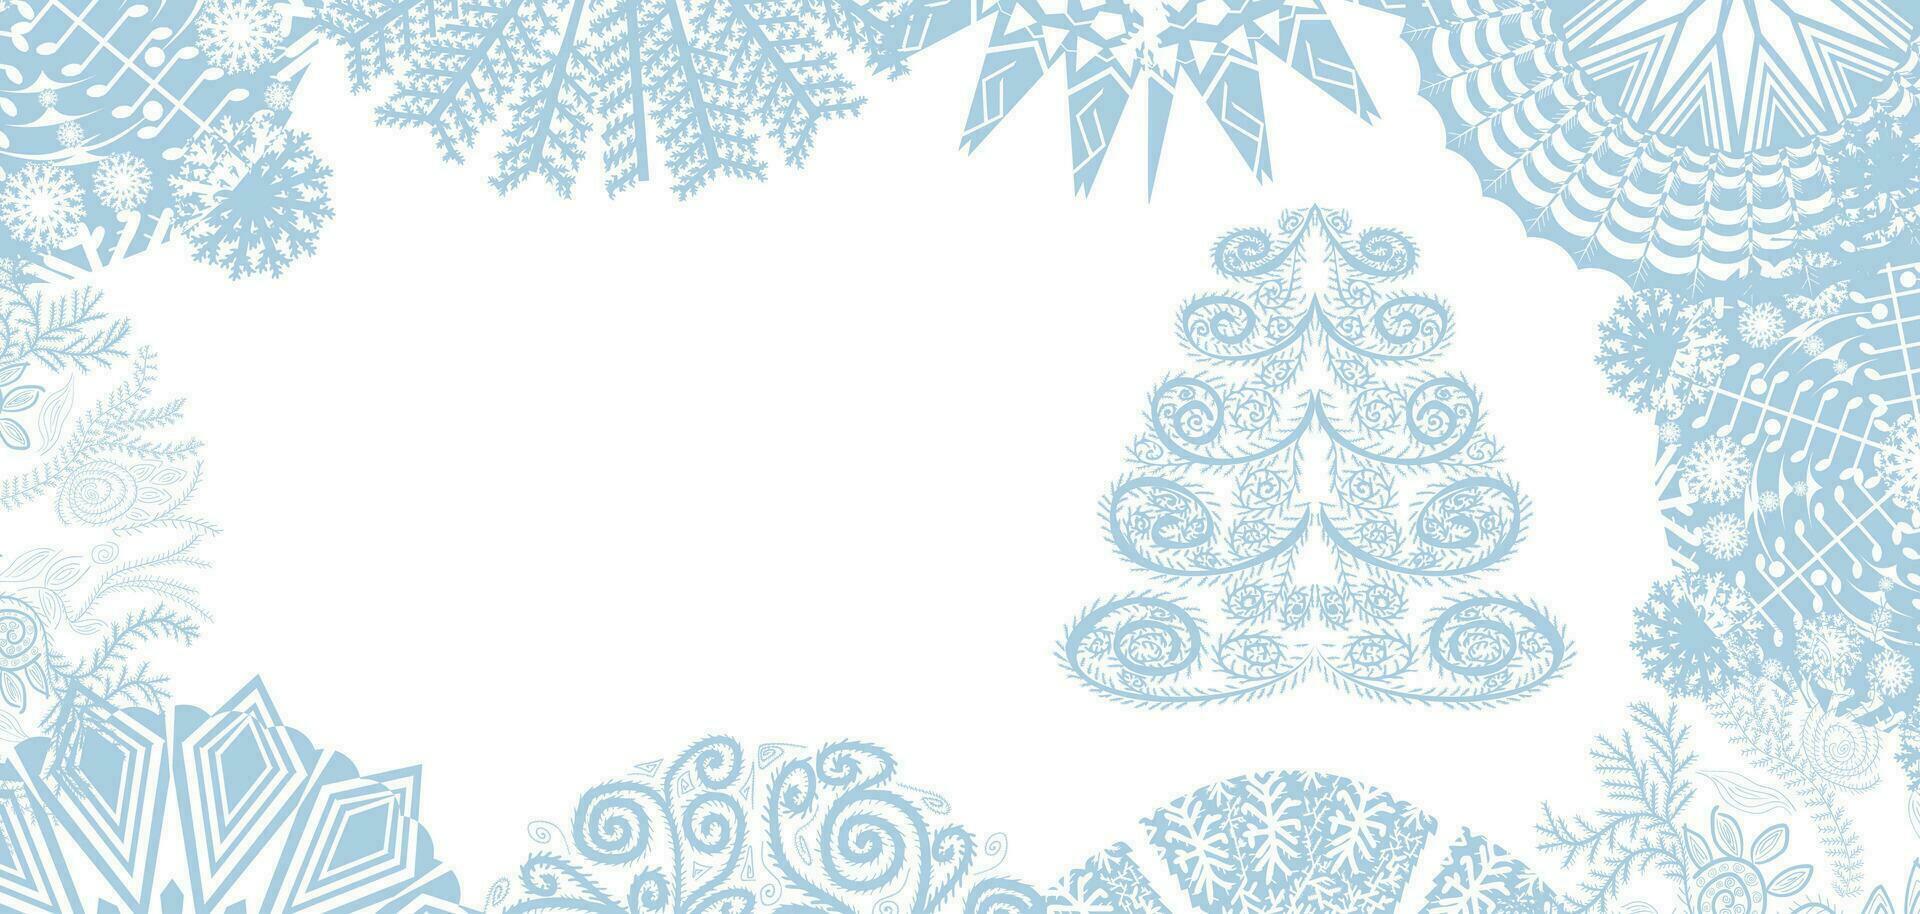 Postcard with a picture of a Christmas tree and various snowflakes on a white background vector